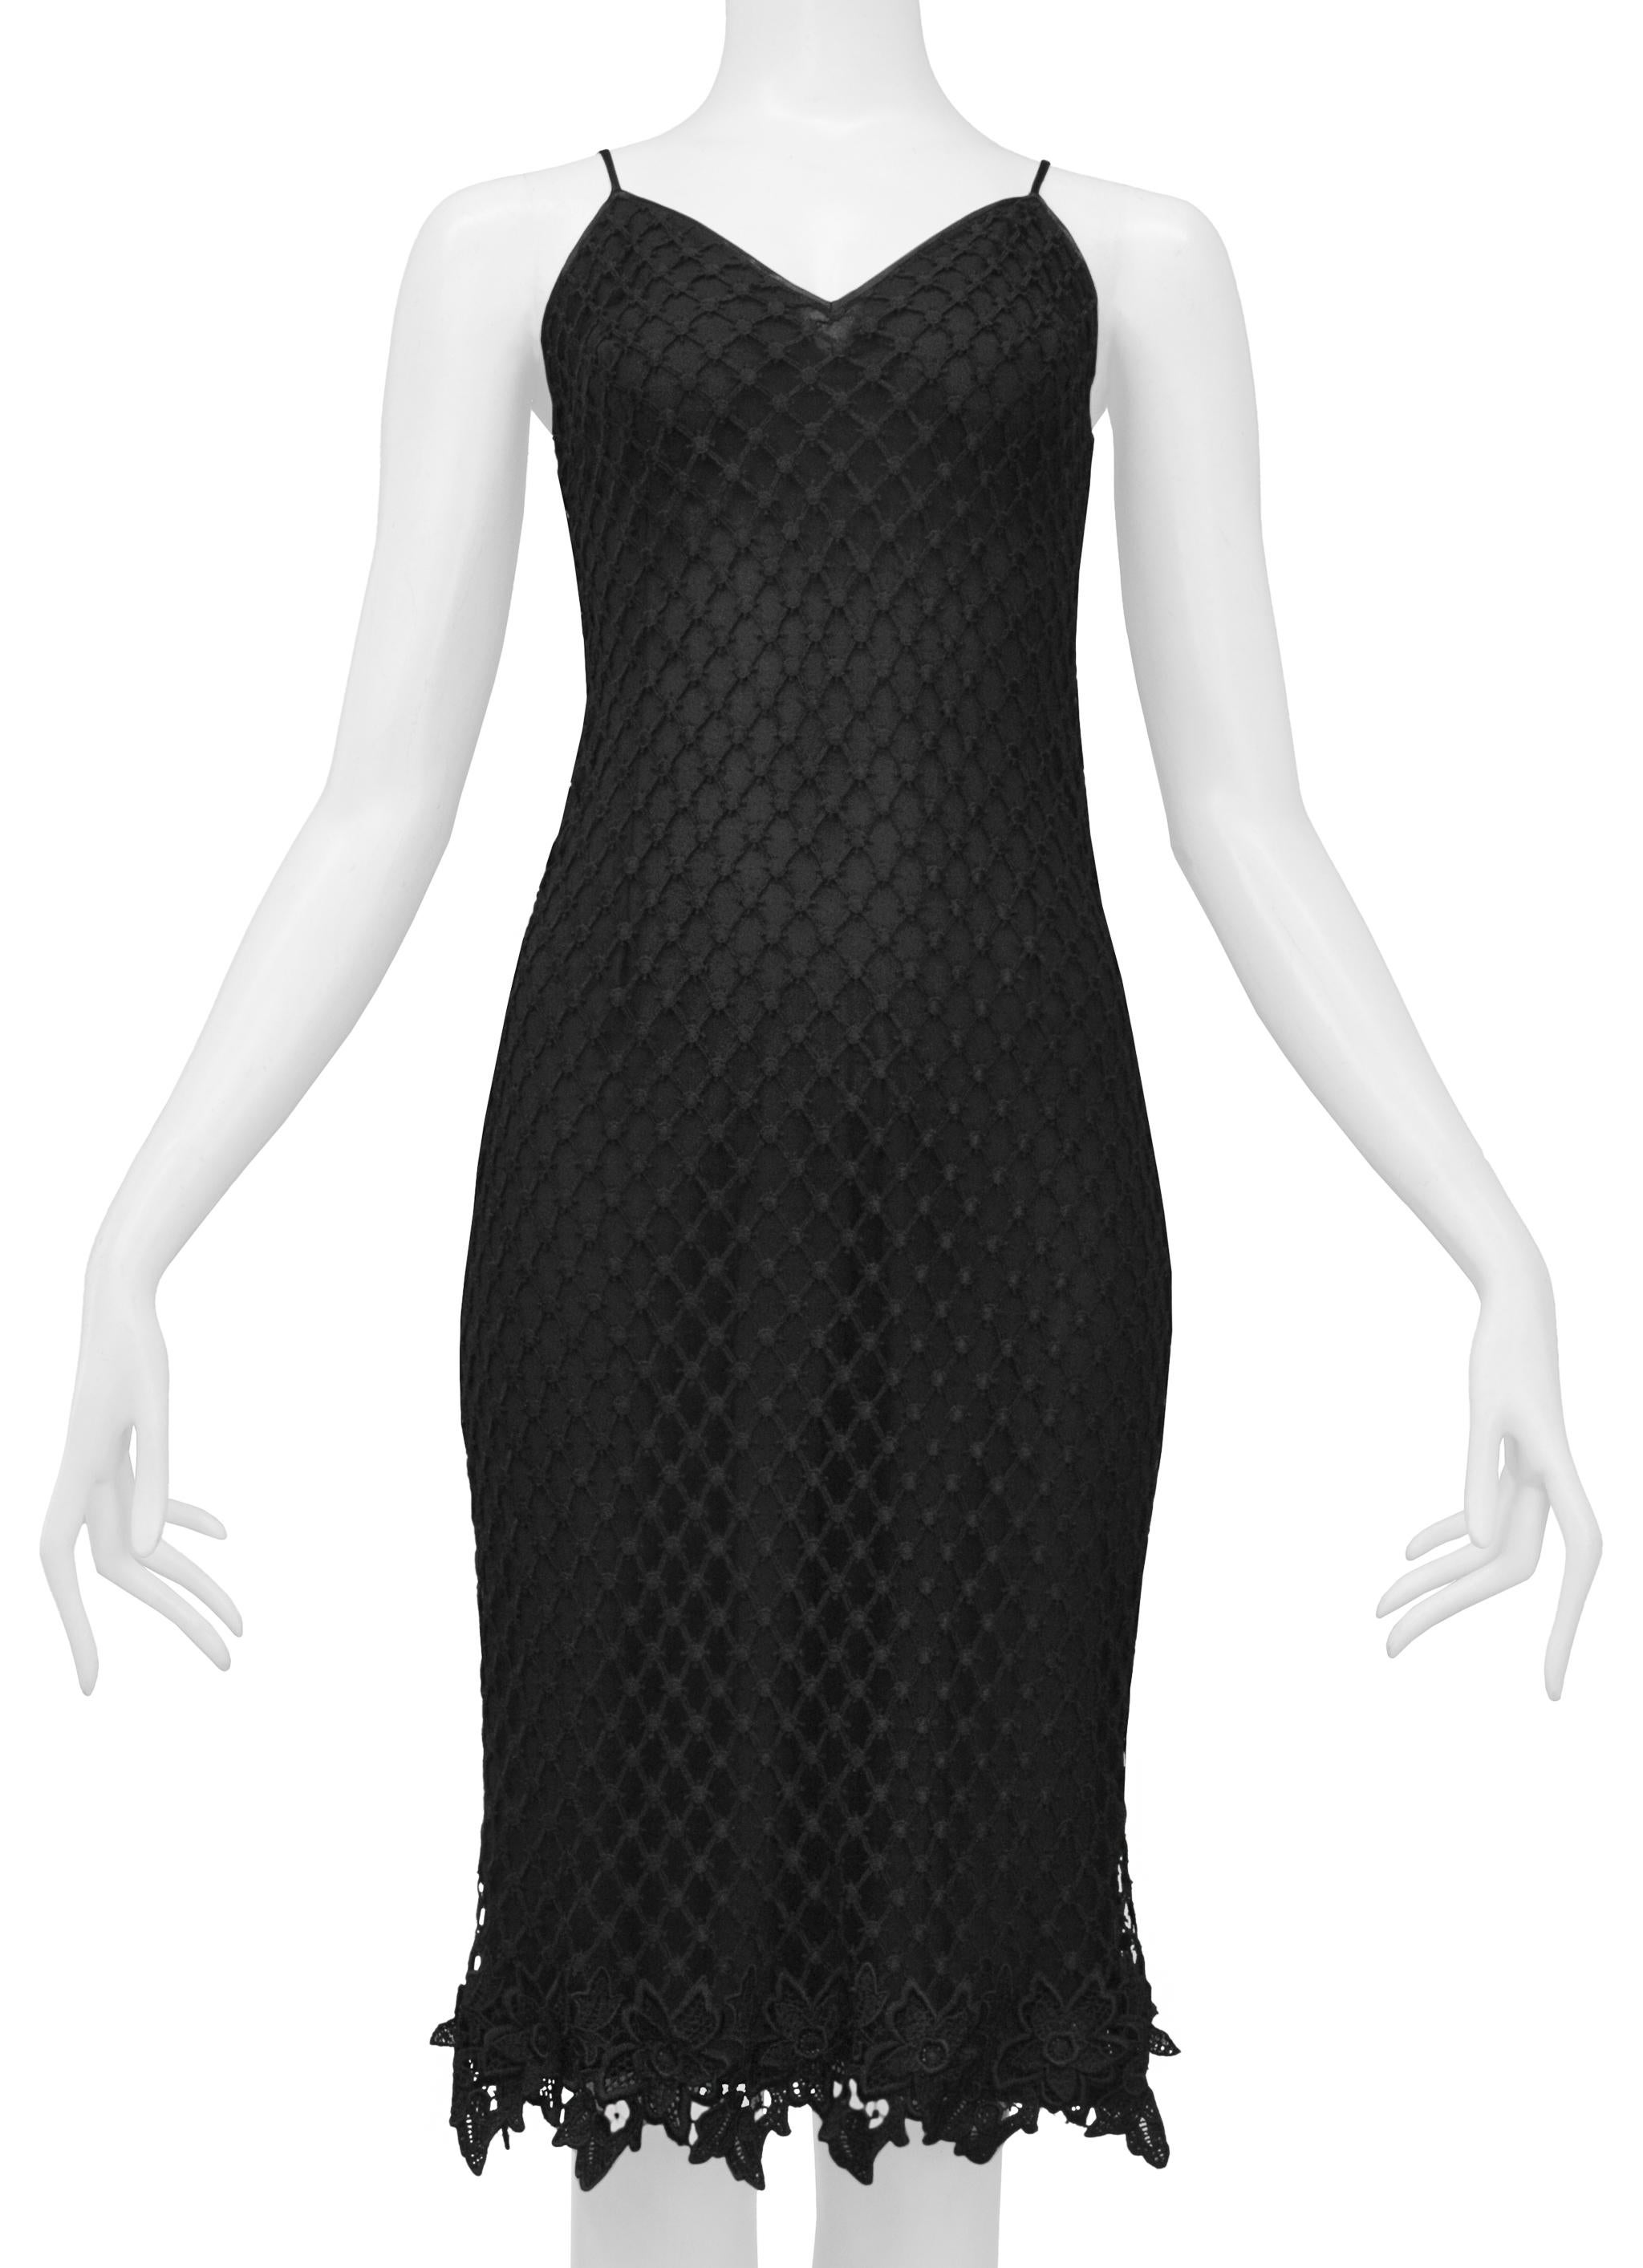 Dolce & Gabbana Black Knit Fishnet Slip Dress 1990s In Good Condition For Sale In Los Angeles, CA